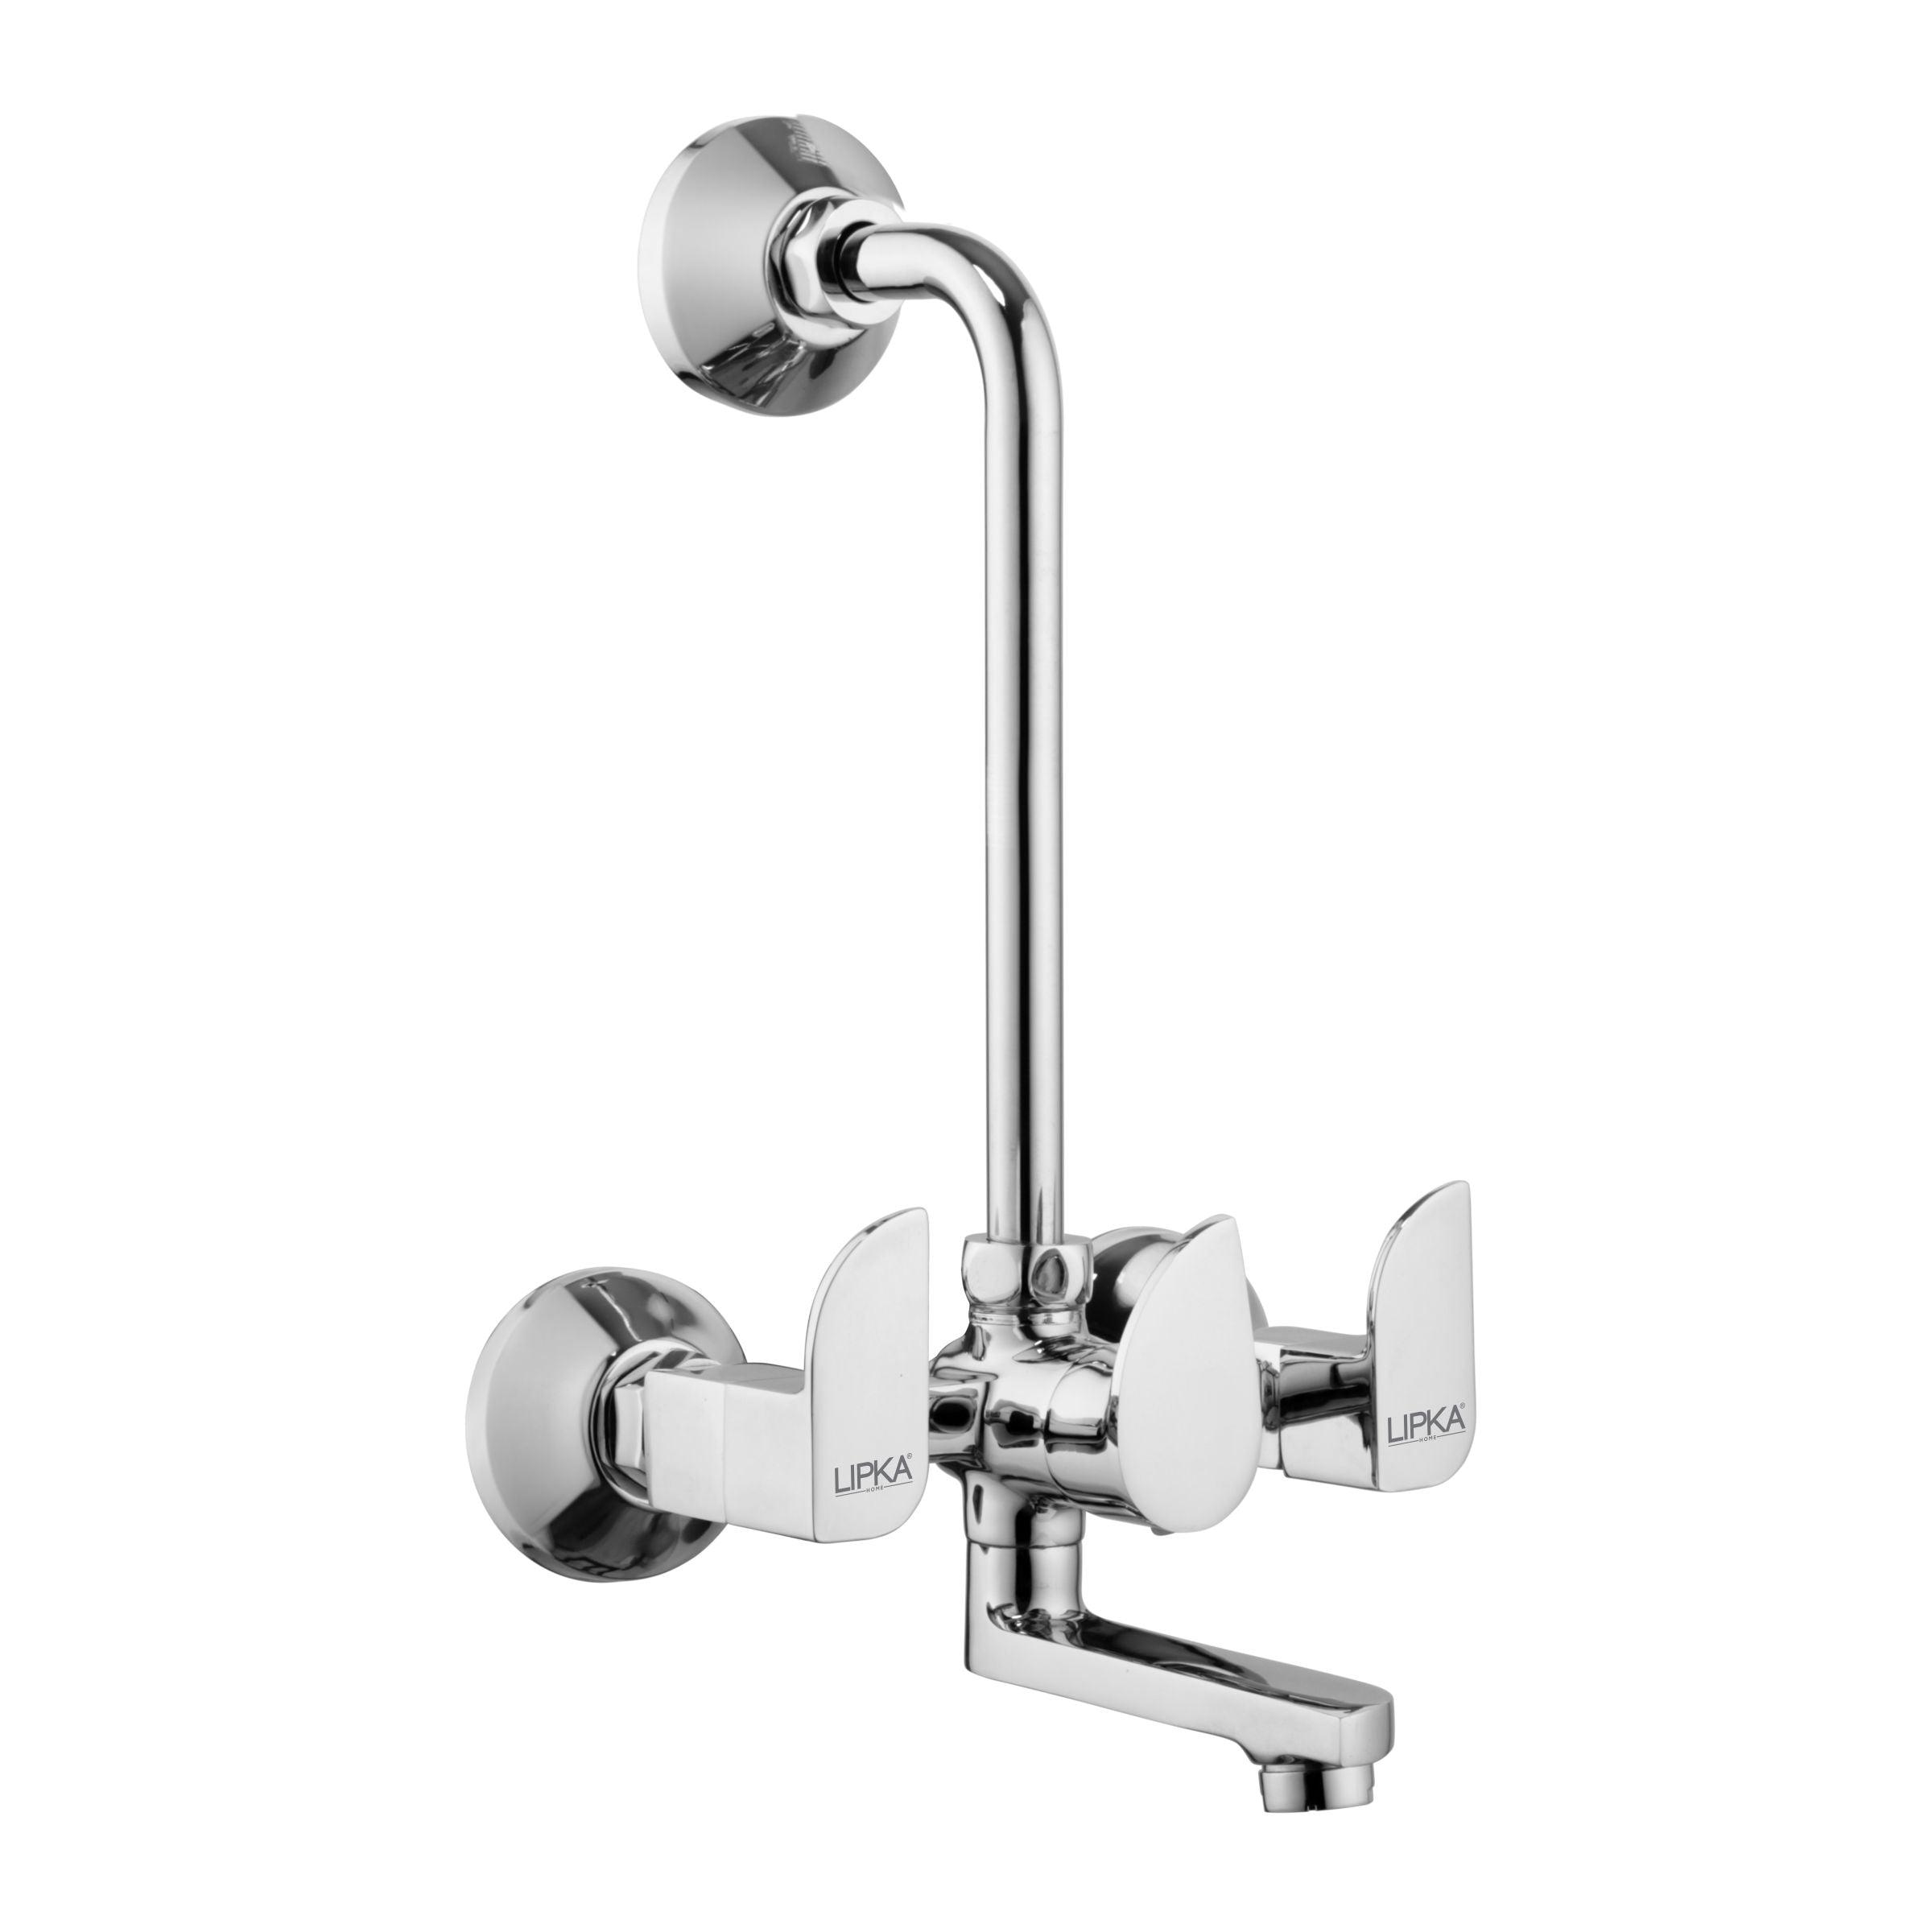 Arise Wall Mixer with L Bend Faucet